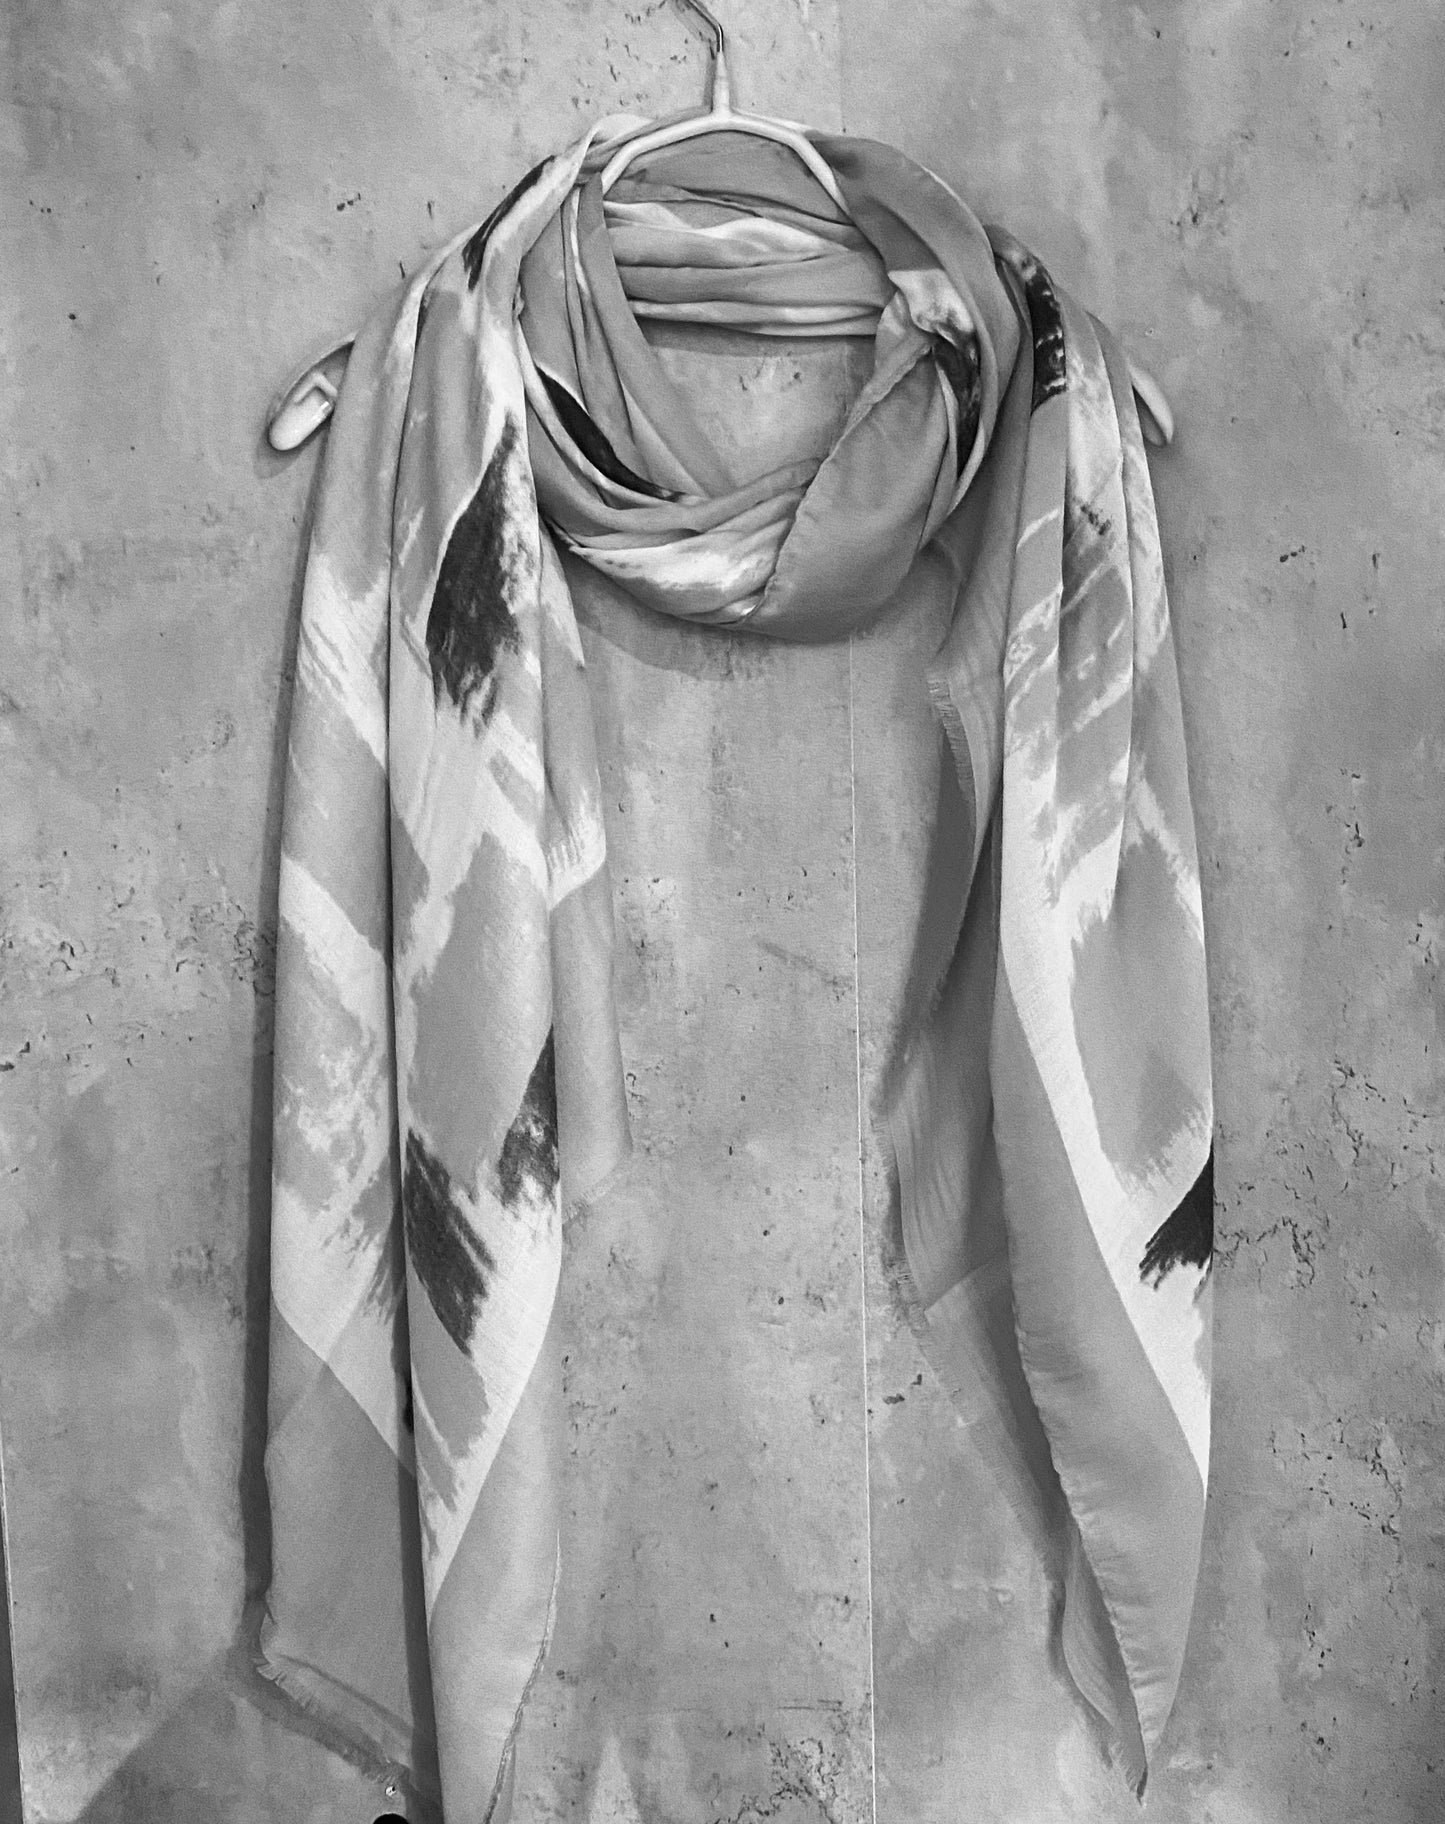 Watercolour Brushed Pattern Grey Cotton Scarf/Spring Summer Autumn Scarf/Gifts For mom/Scarf Women/UK Seller/Gifts For Her Birthday